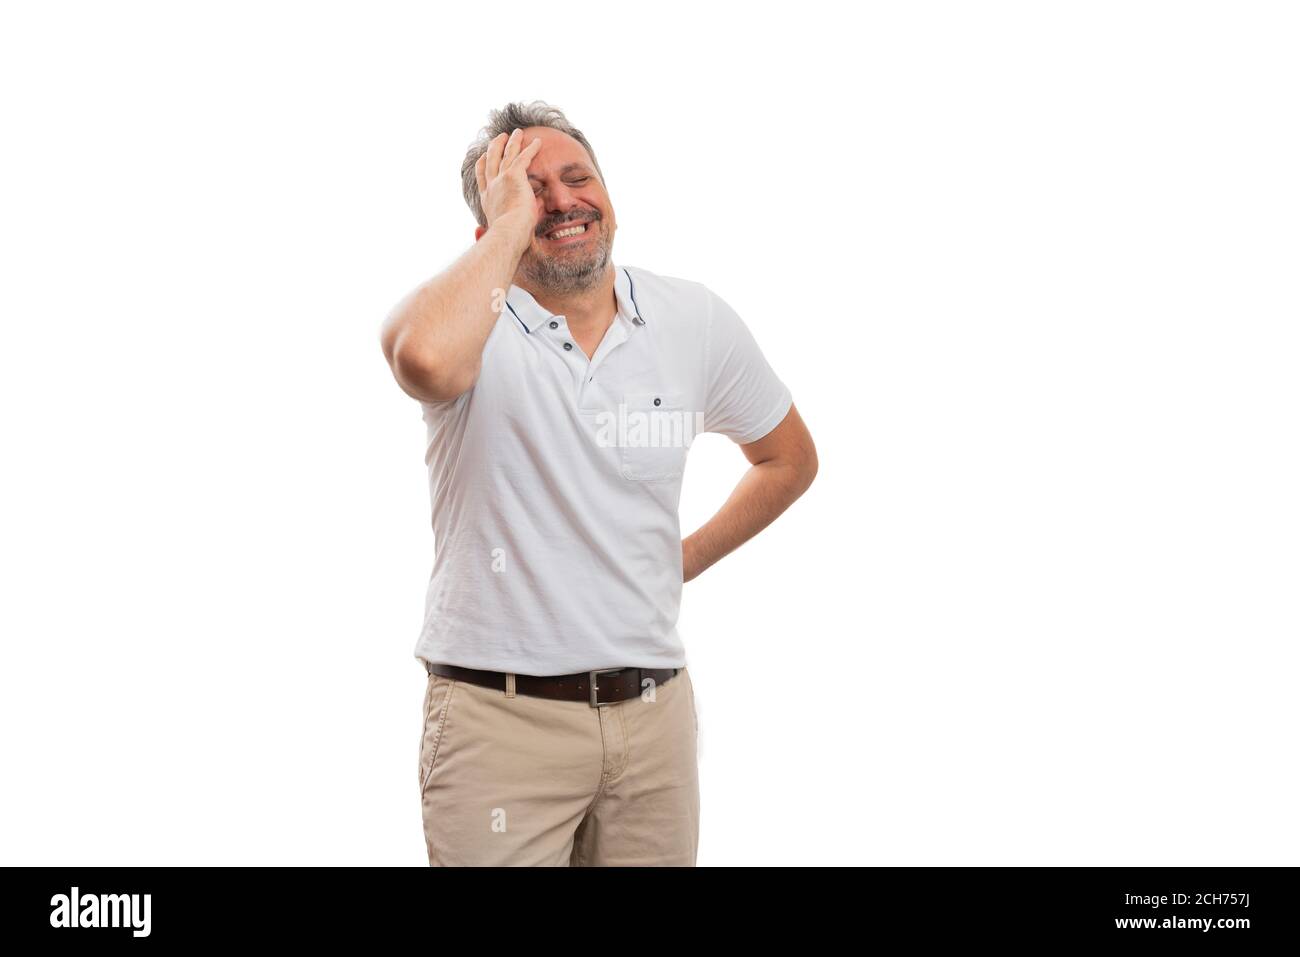 Man wearing white tshirt laughing smiling touching forehead as funny gesture fashionable stylish casual summer clothing concept isolated on studio bac Stock Photo